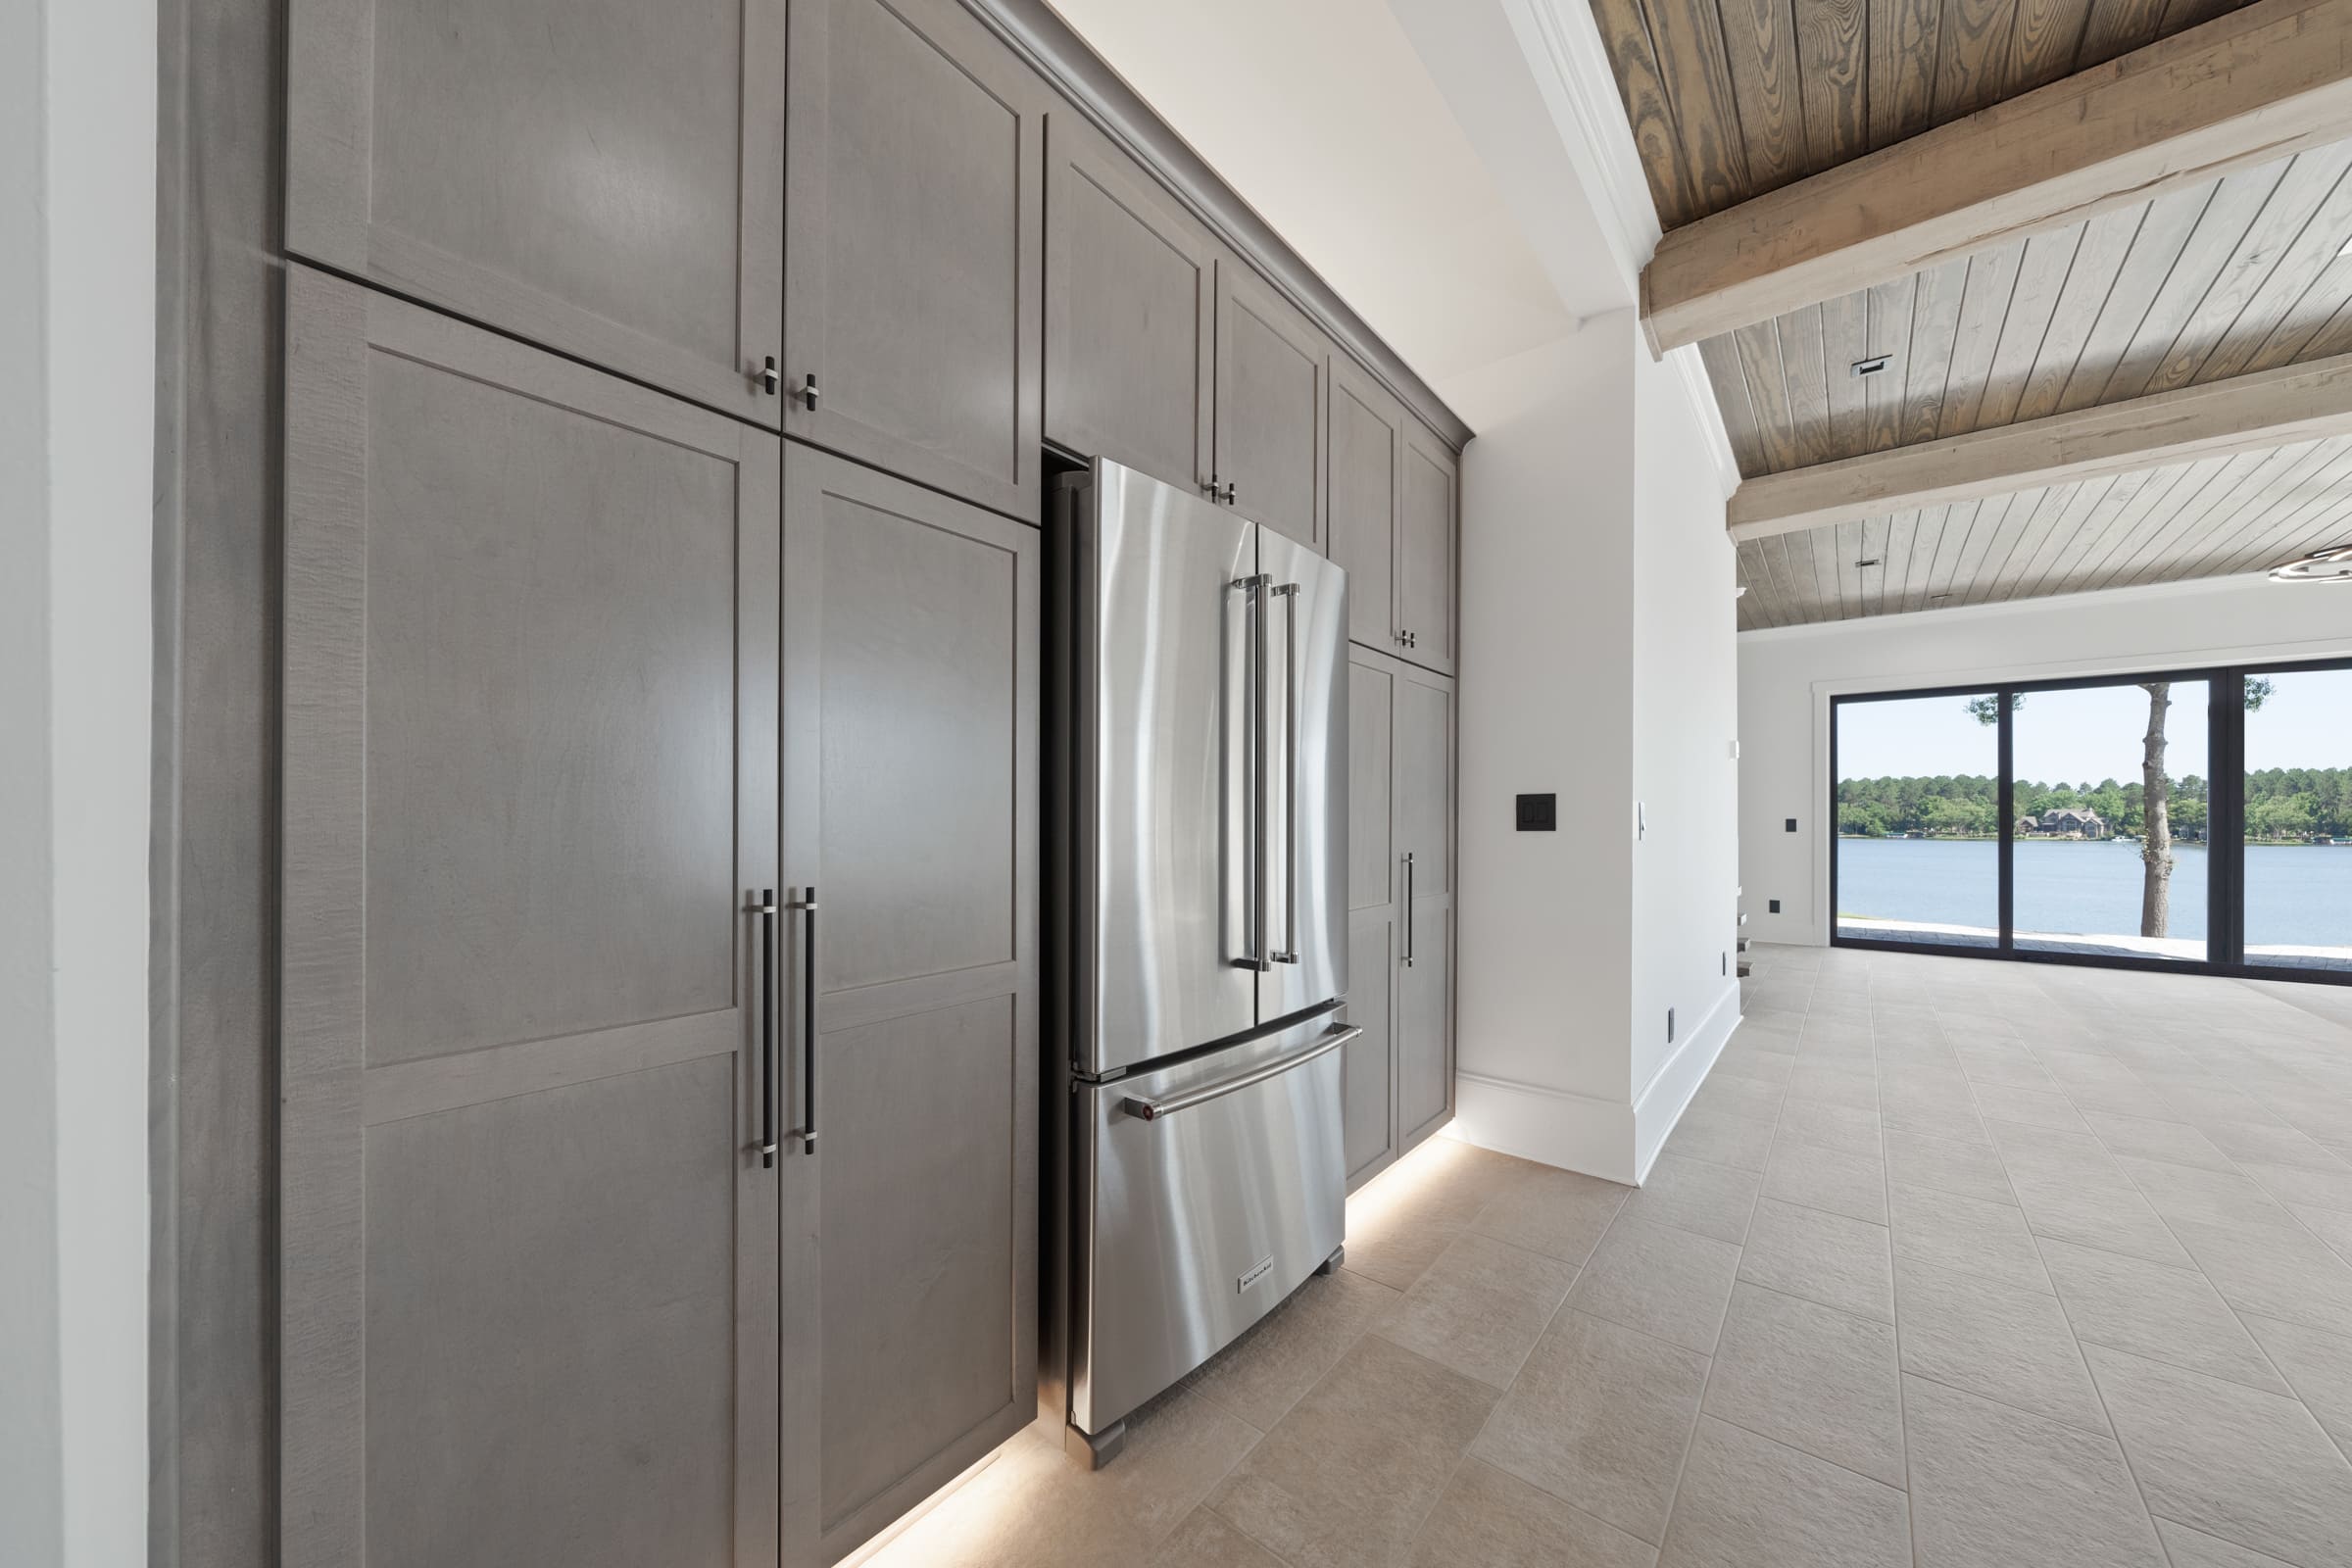 Full Grey Cabinetry and Fridge |PAXISgroup